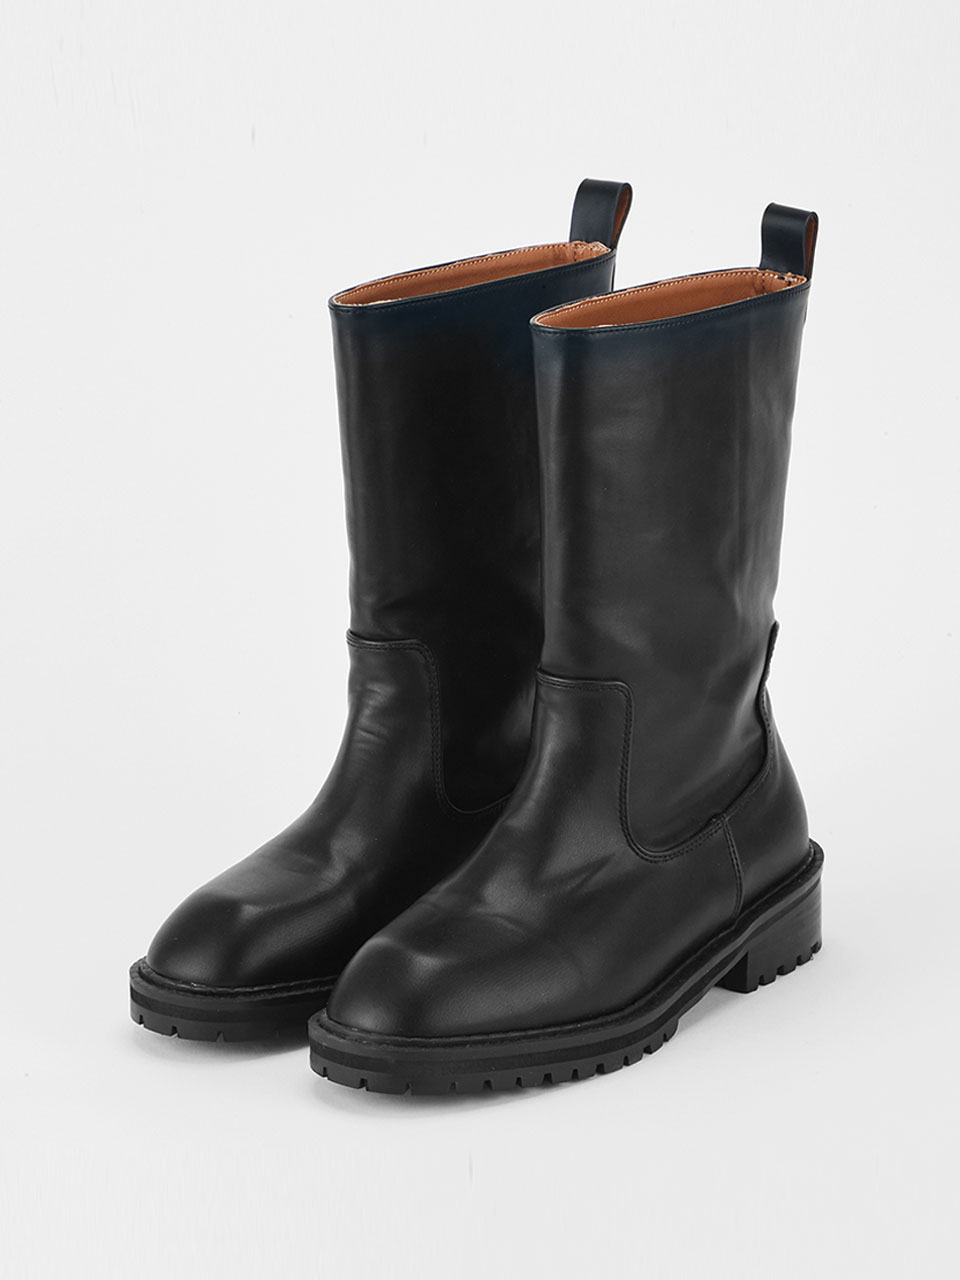 Classic Middle Boots (Black)